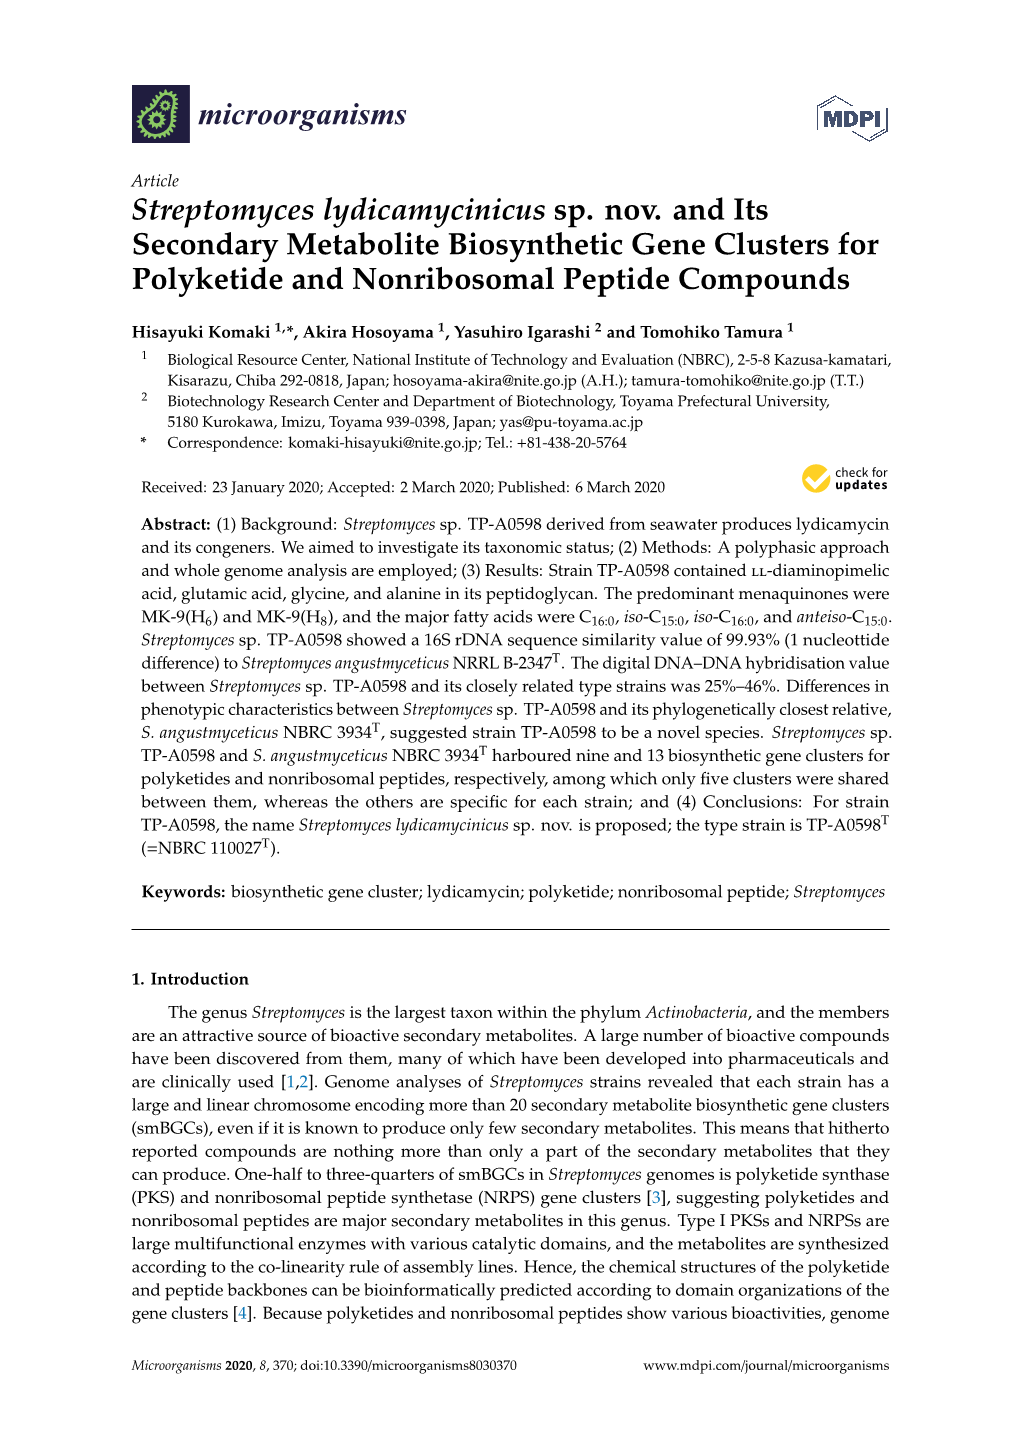 Streptomyces Lydicamycinicus Sp. Nov. and Its Secondary Metabolite Biosynthetic Gene Clusters for Polyketide and Nonribosomal Peptide Compounds